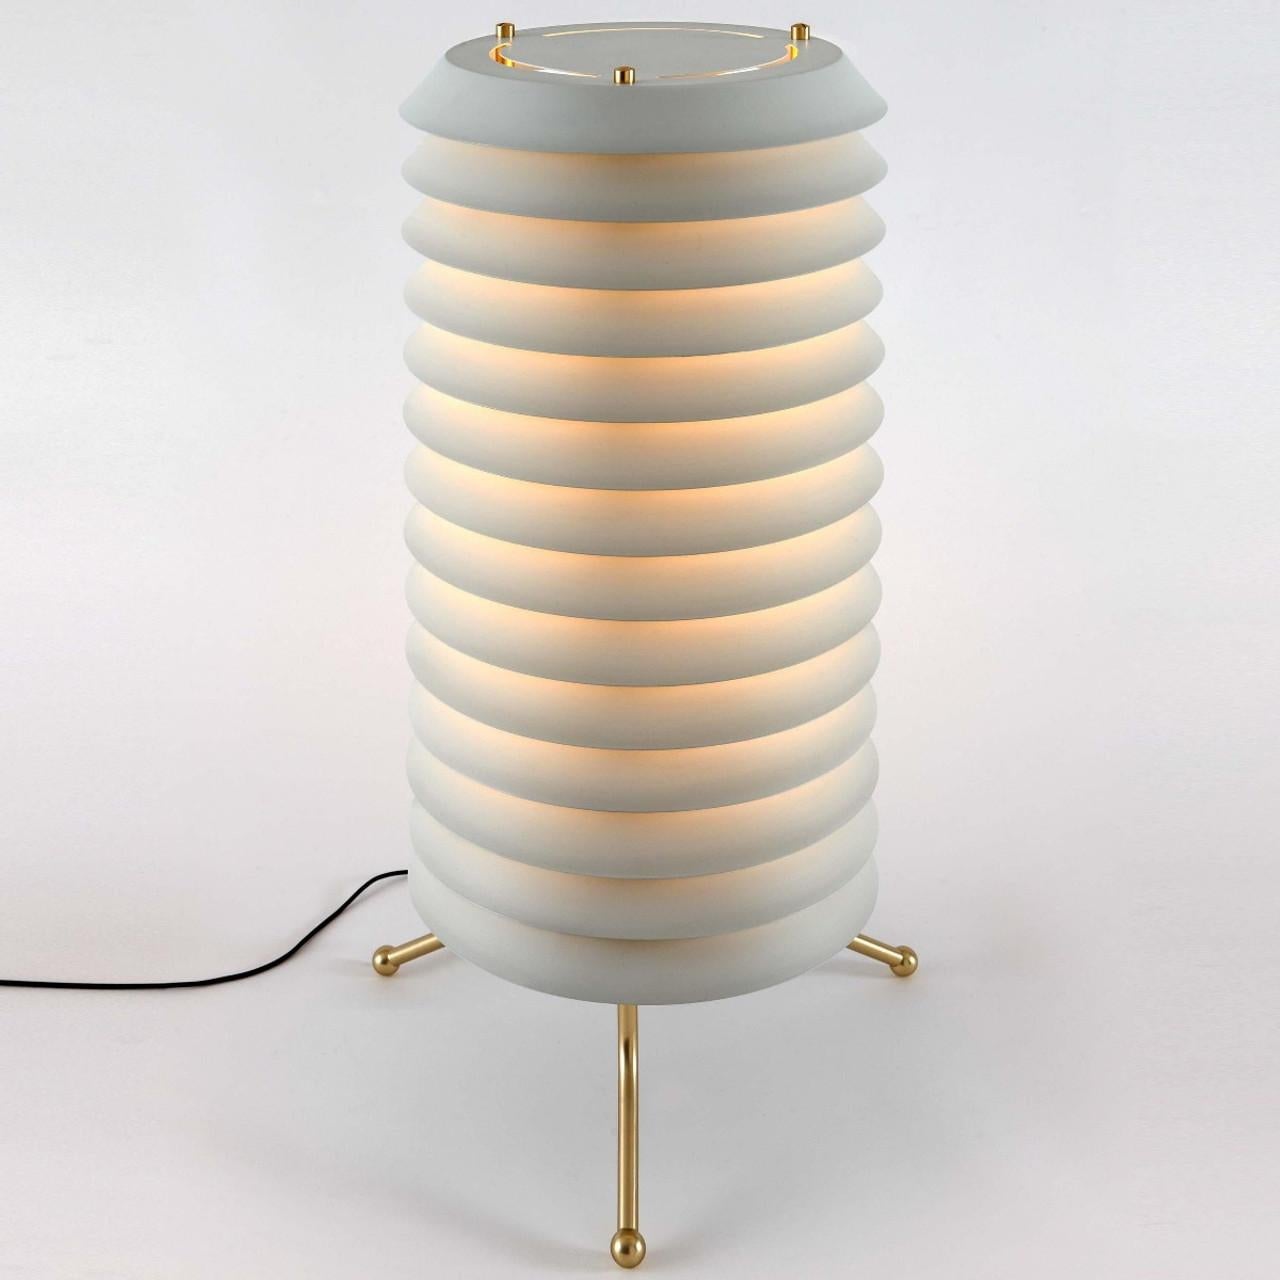 Maija 30 floor or table lamp by Ilmari Tapiovaara for Santa and Cole originally designed in Spain, 1955. Diffuser in white translucent glass. Nude/Rose re-edition. Wired for US junction boxes. circular canopy included. Suitable for dimming systems